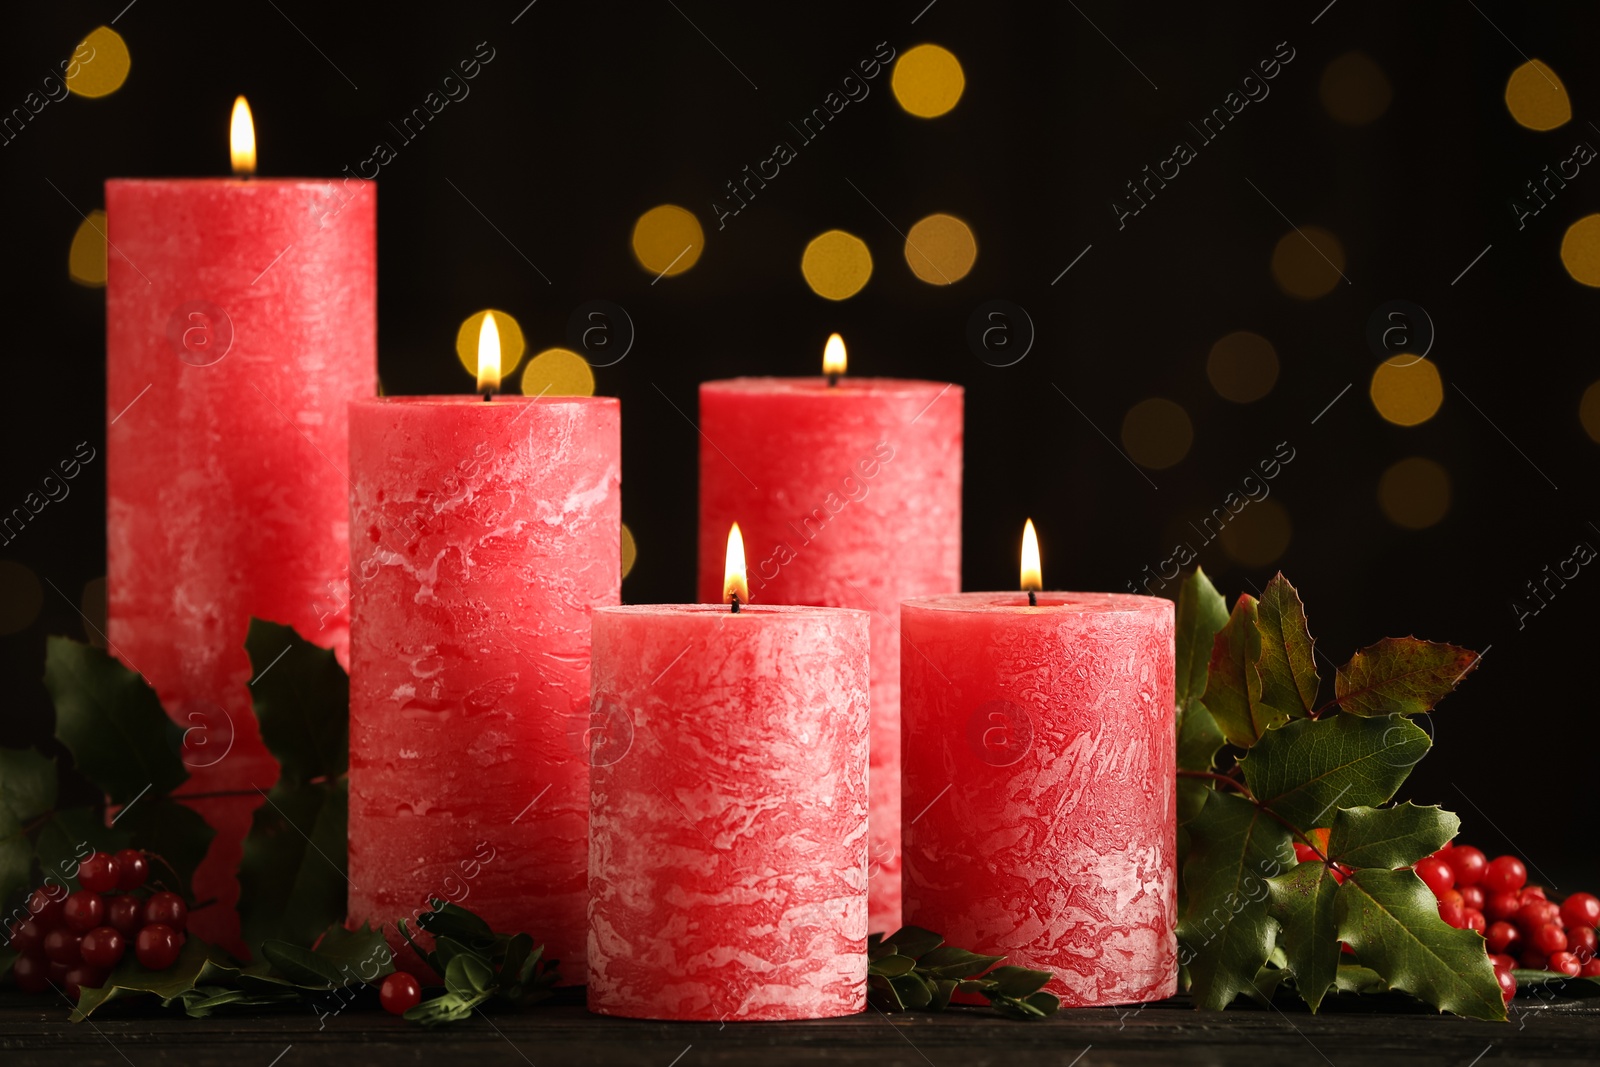 Photo of Burning red candles with holly branches on table against blurred Christmas lights